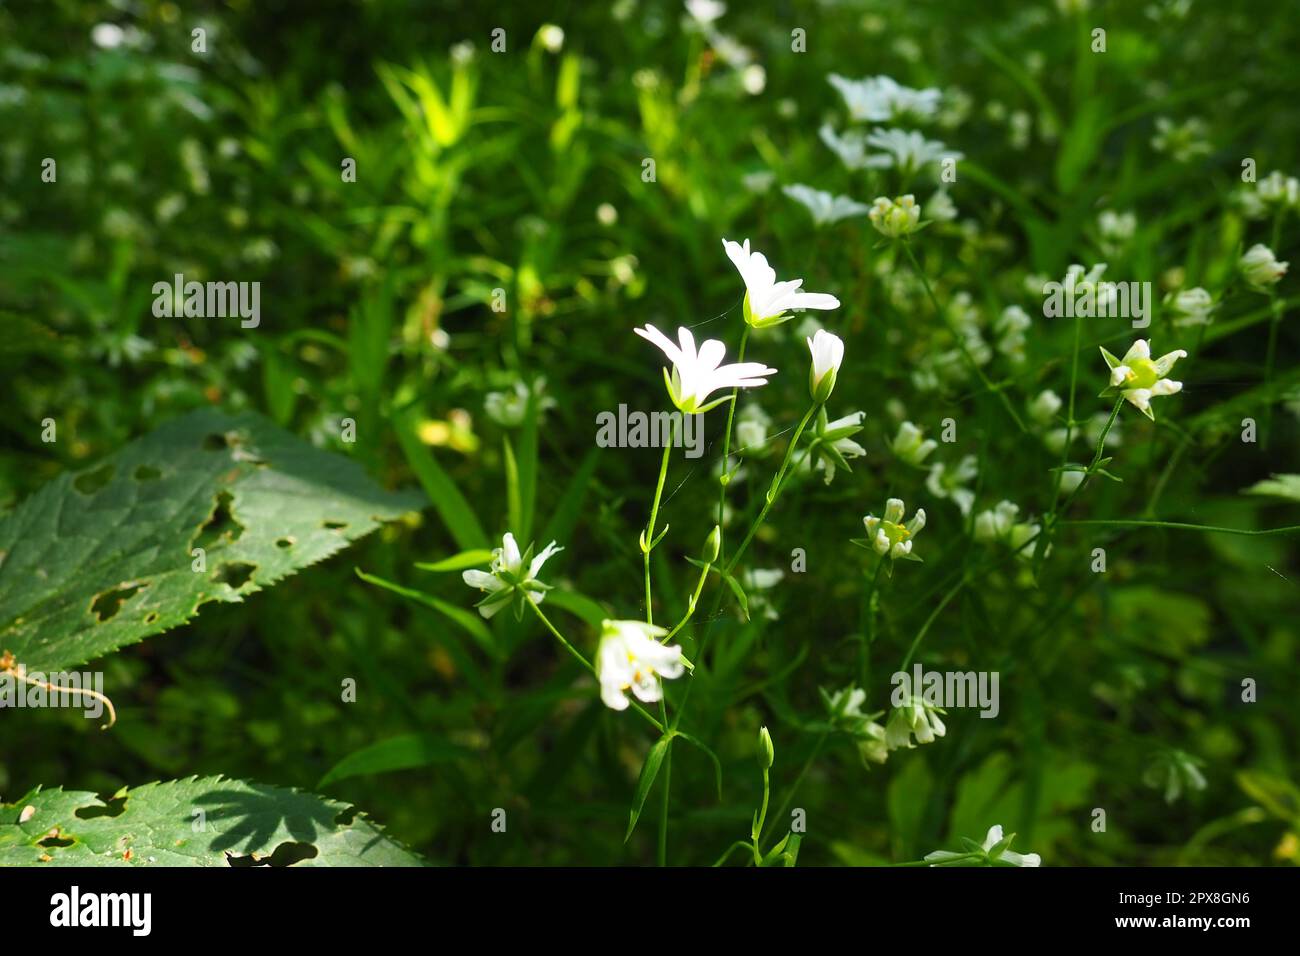 Starflower Stellaria is a genus of flowering plants in the Carnation family. Wood louse plant. White flowers in the forest. Fruska Gora, Serbia. beaut Stock Photo